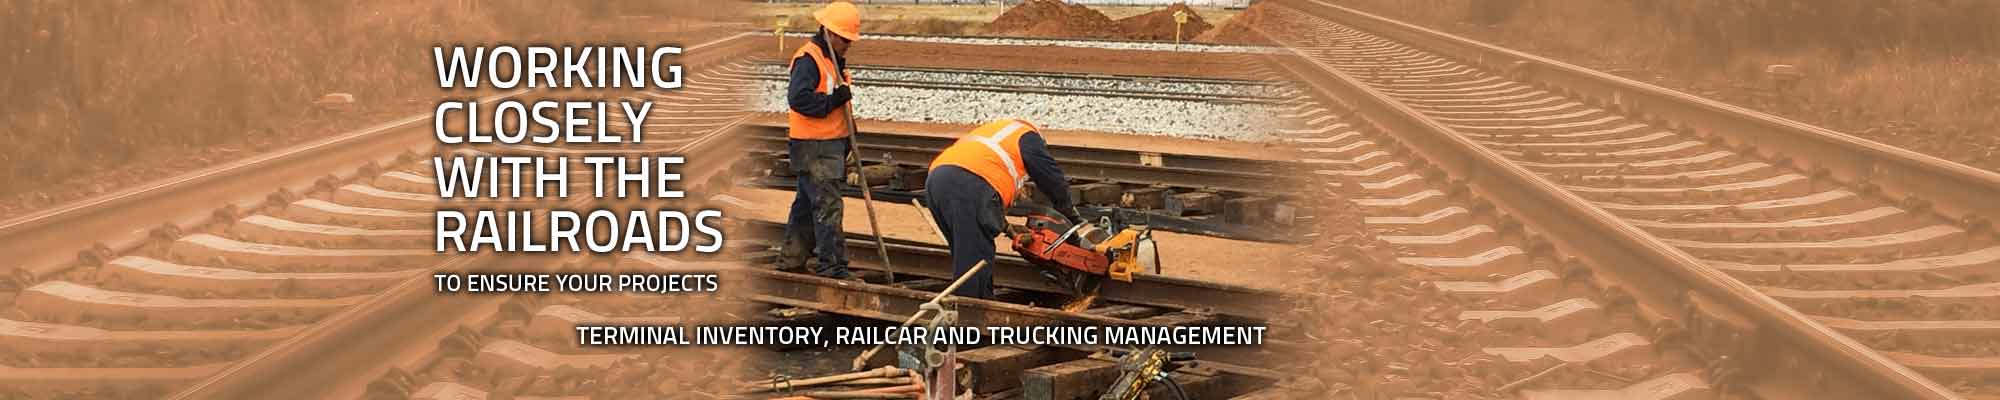 Working closely with the Railroads